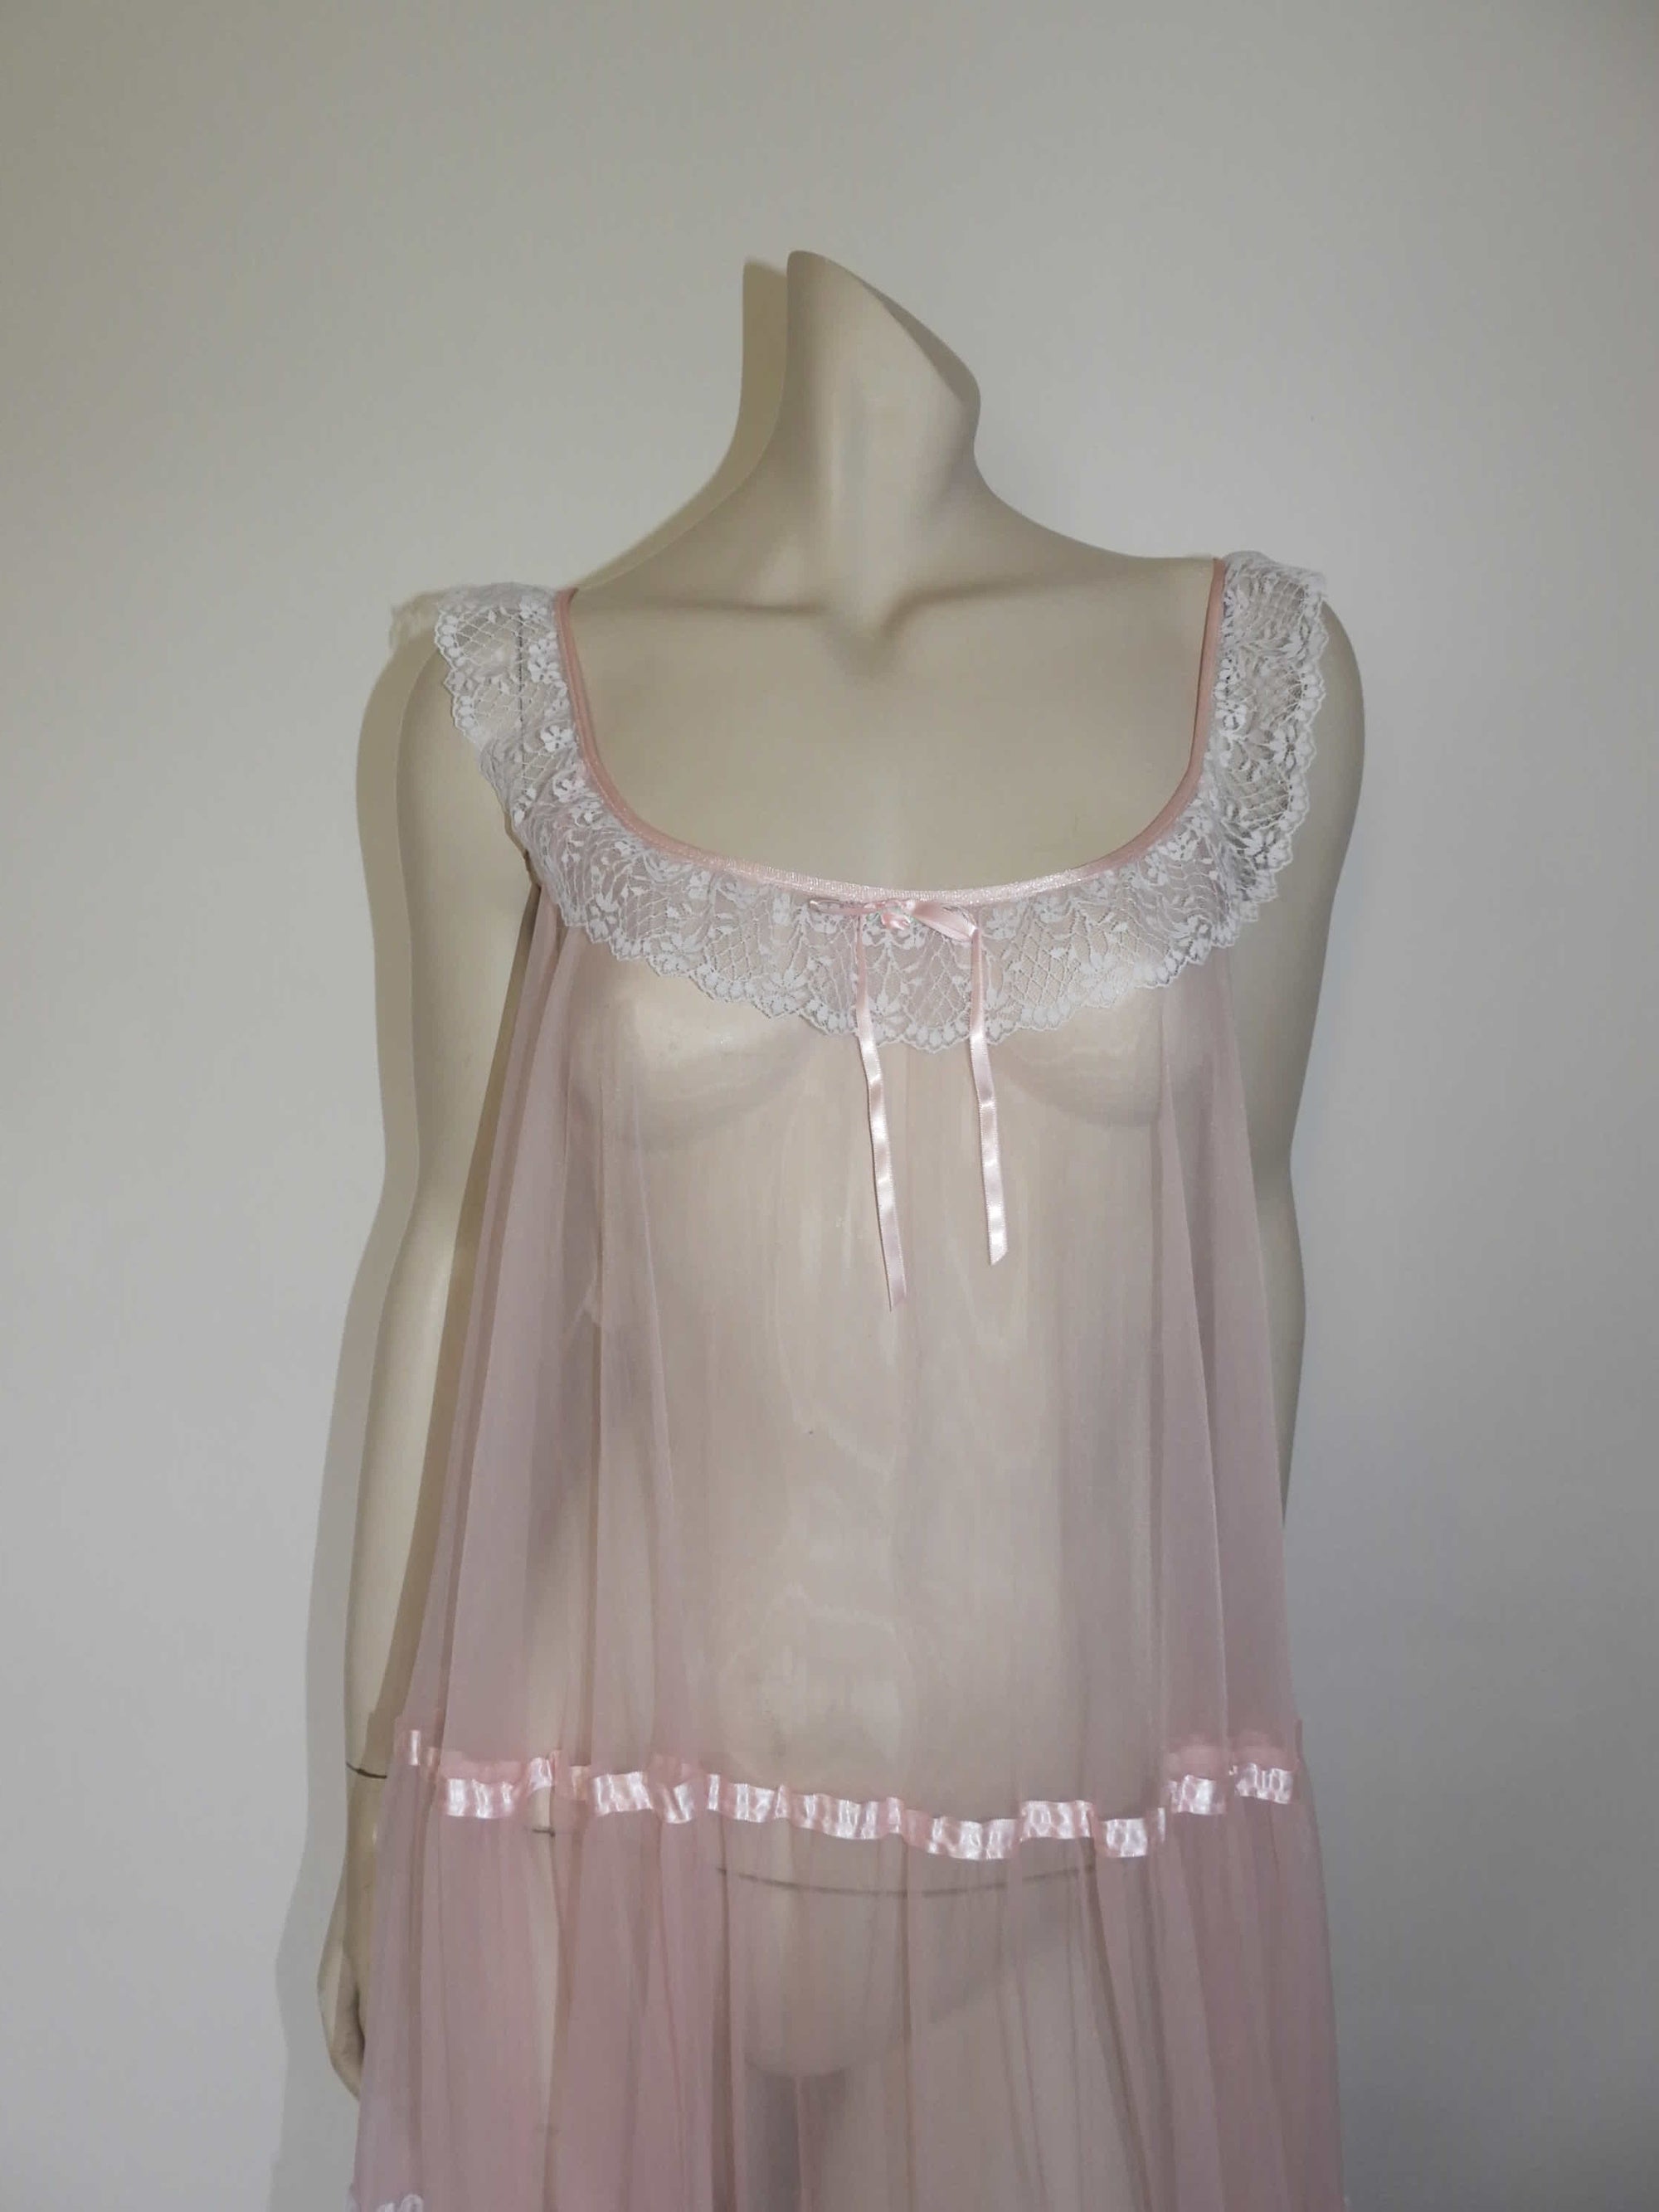 vintage sheer pink negligee nightgown with deep lace ruffle